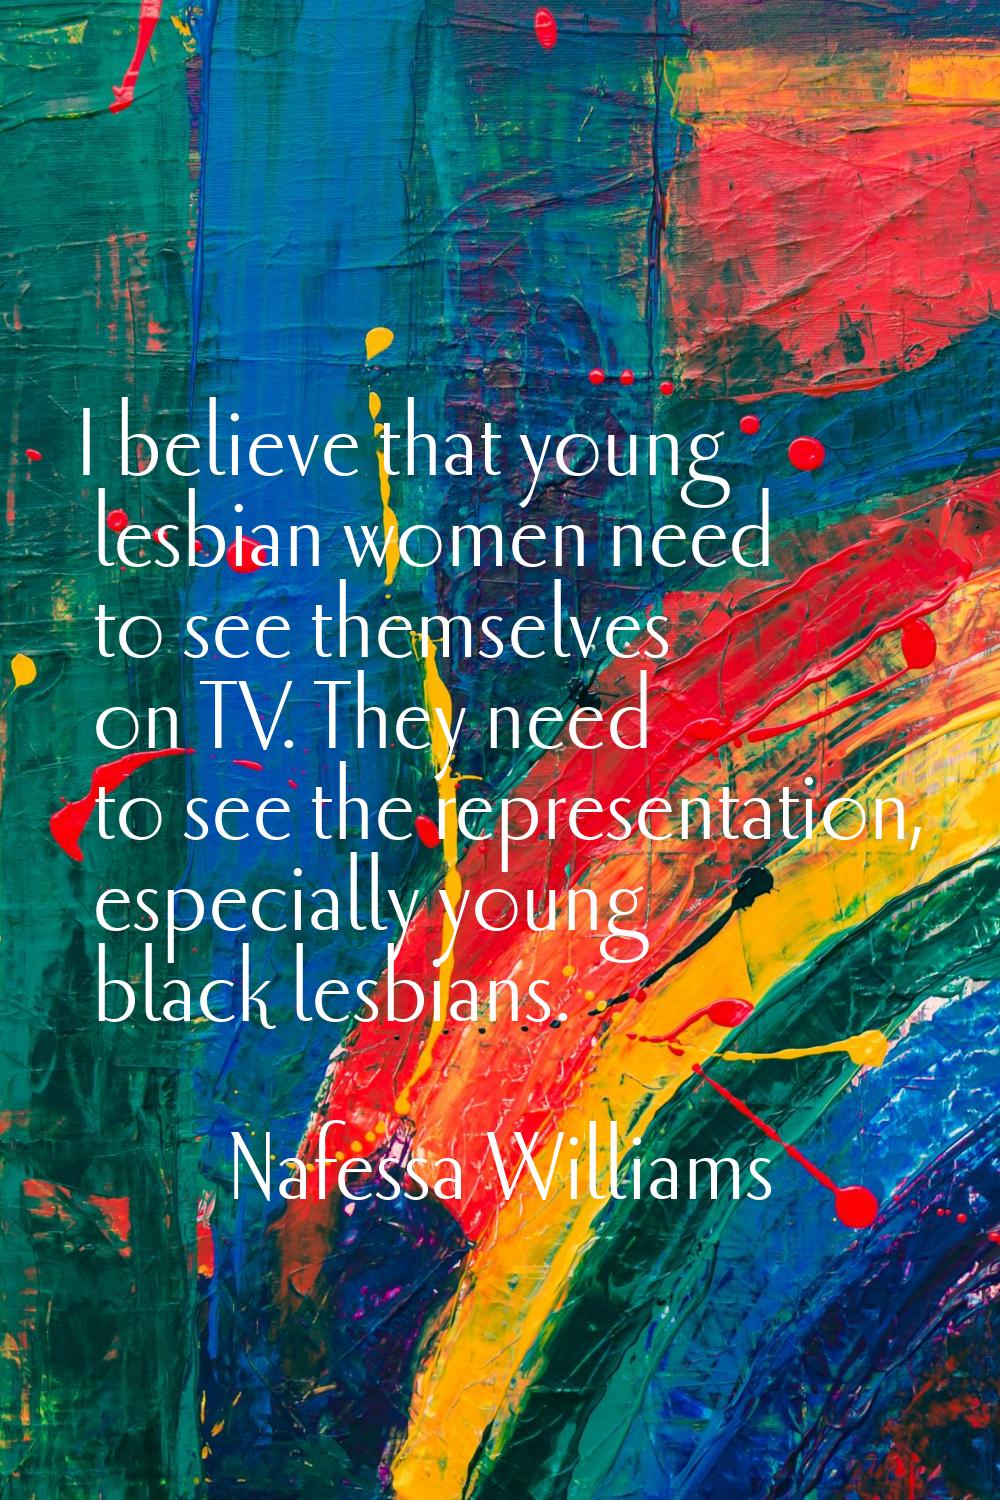 I believe that young lesbian women need to see themselves on TV. They need to see the representatio